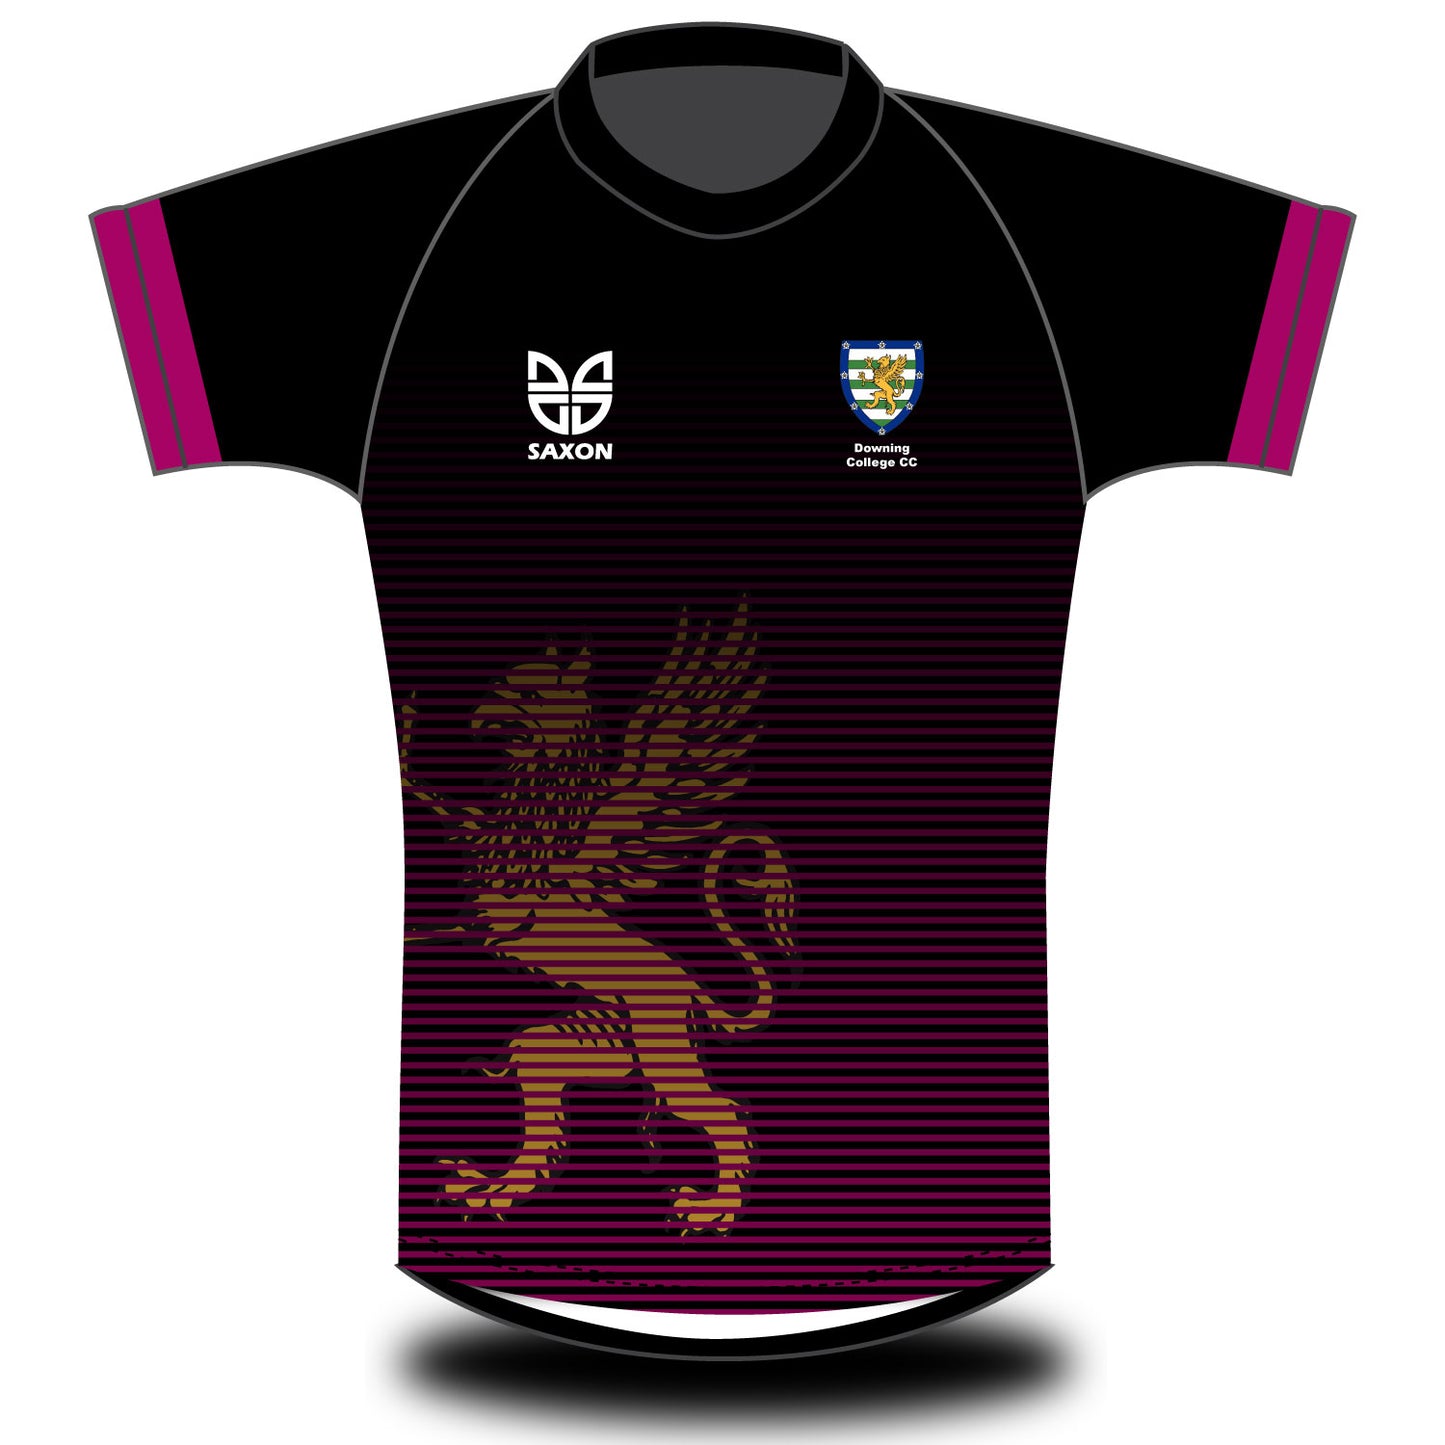 Downing College Cricket Club Coloured Match Shirt